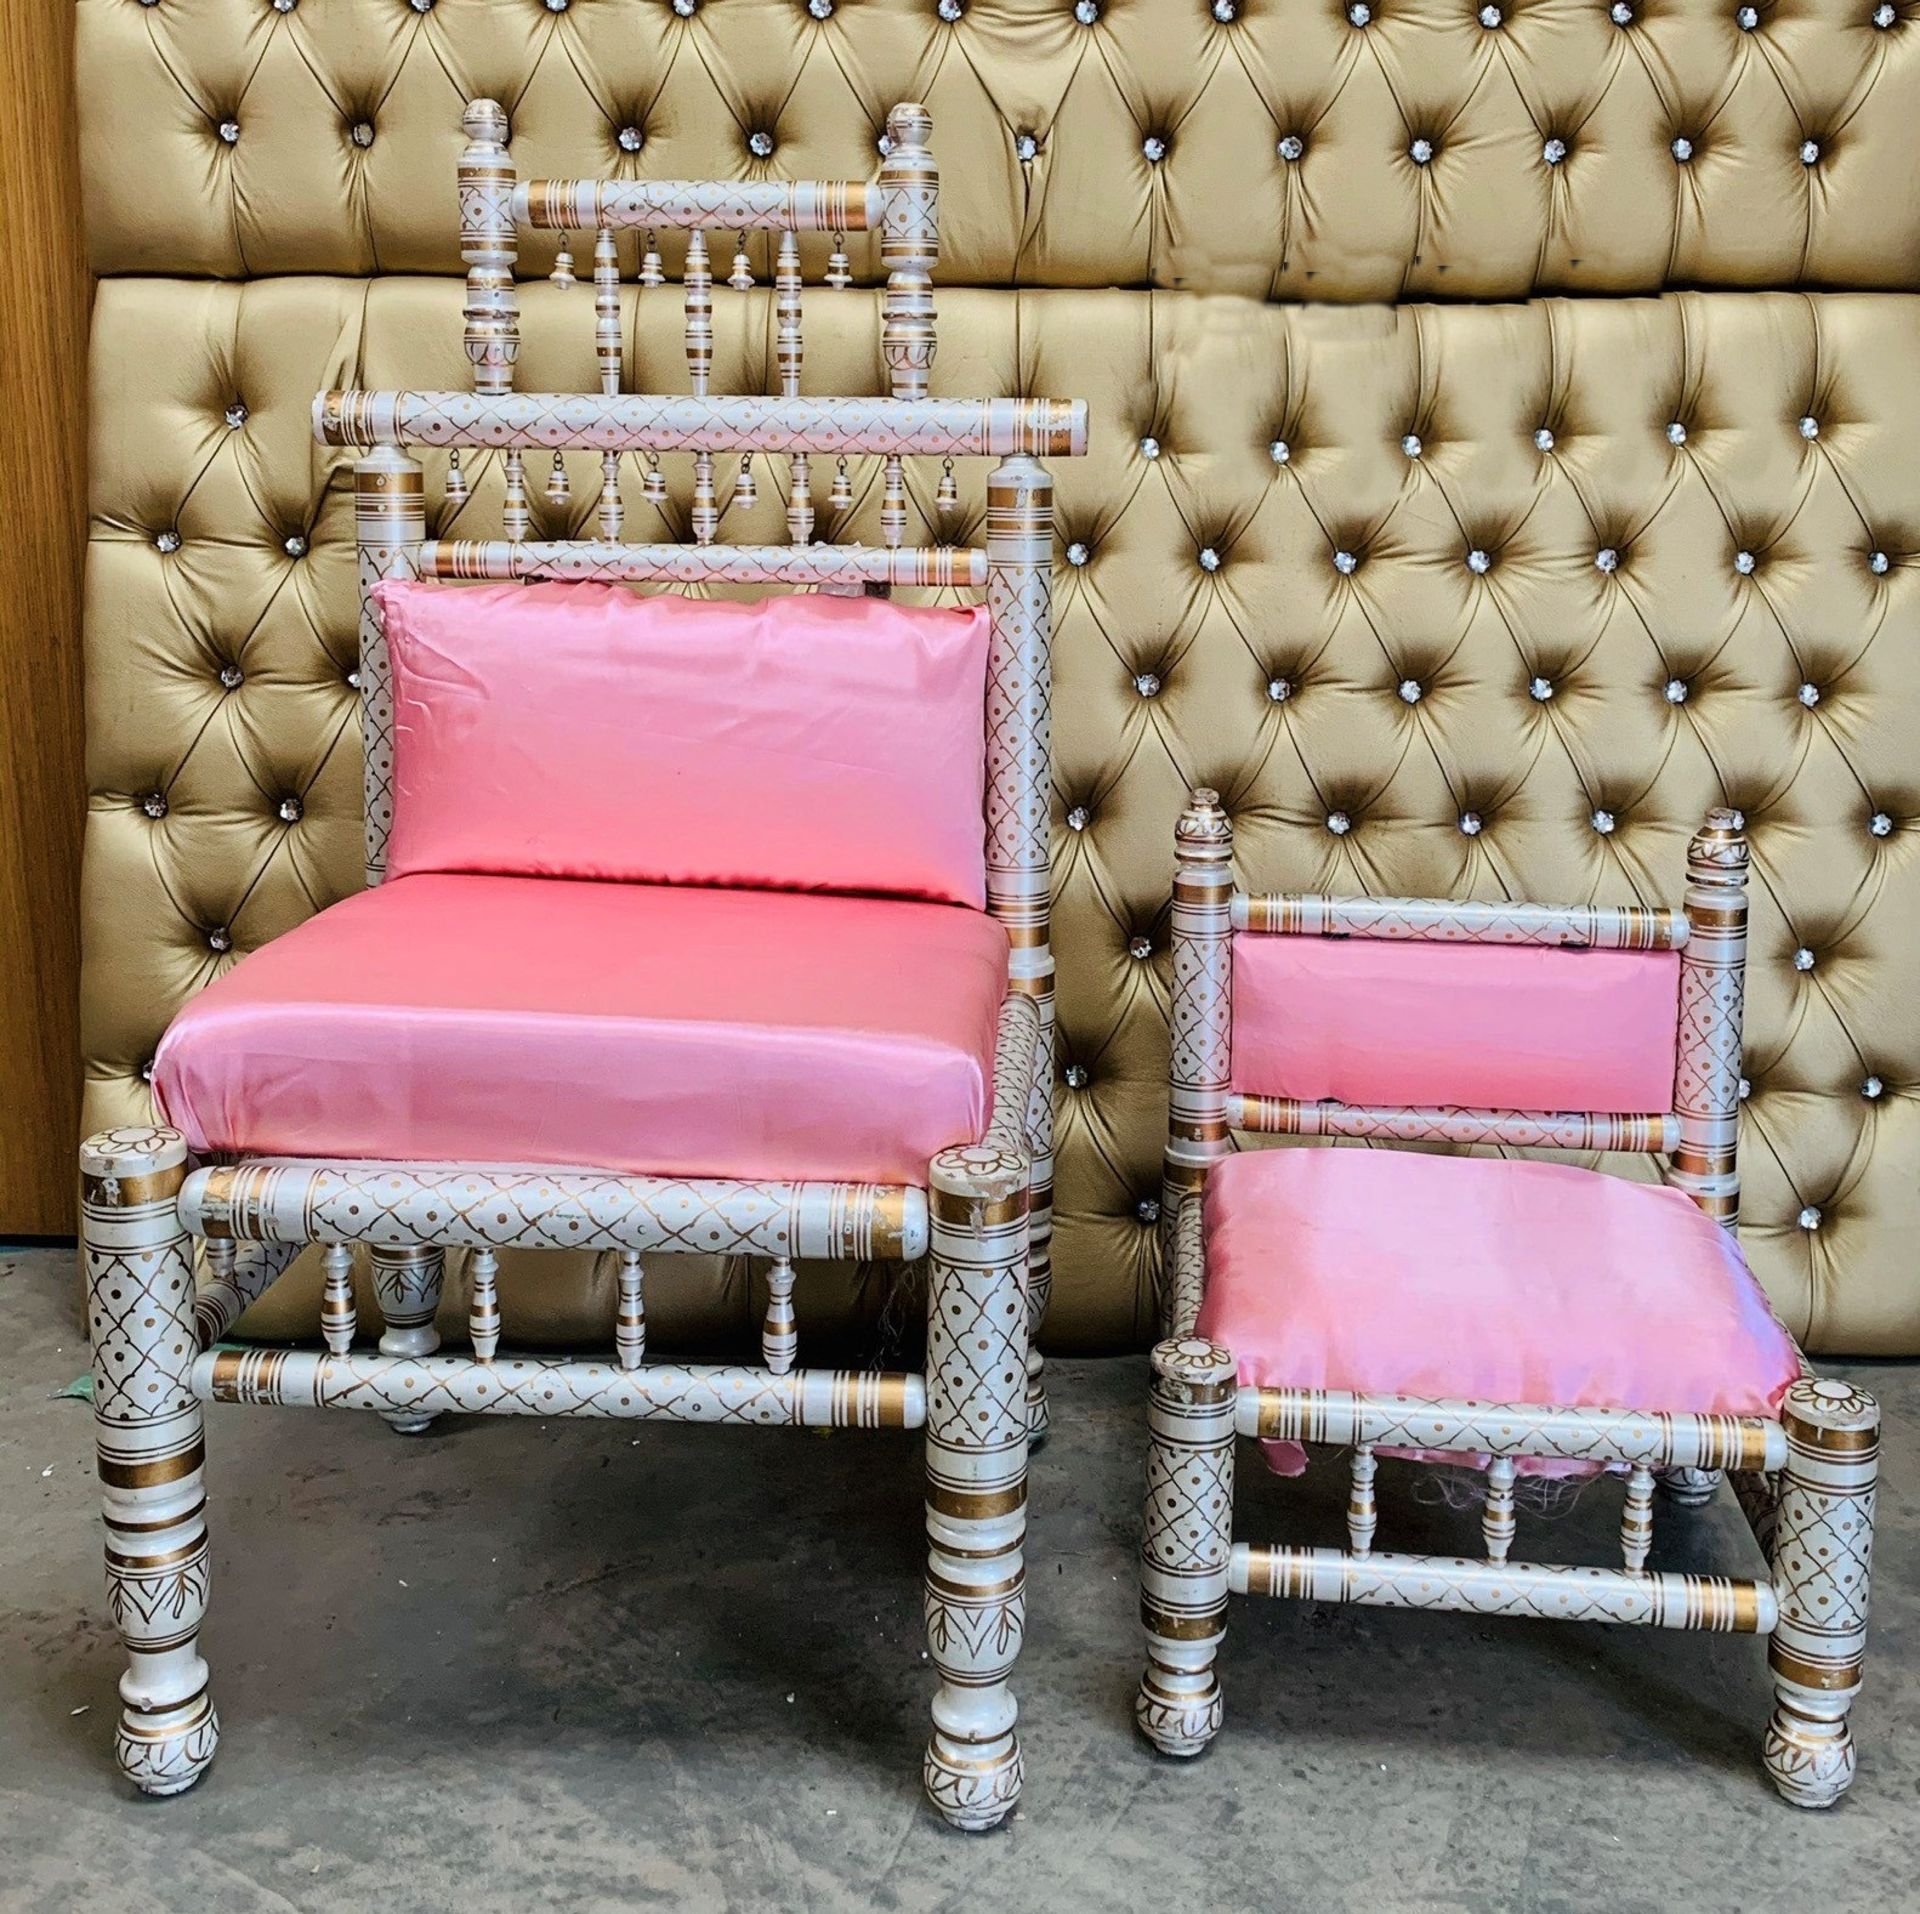 Little And Large Pink Chair Set - Dimensions: Large 115cm (h) x 65cm (w), Small 59cm (h) x 46cm (